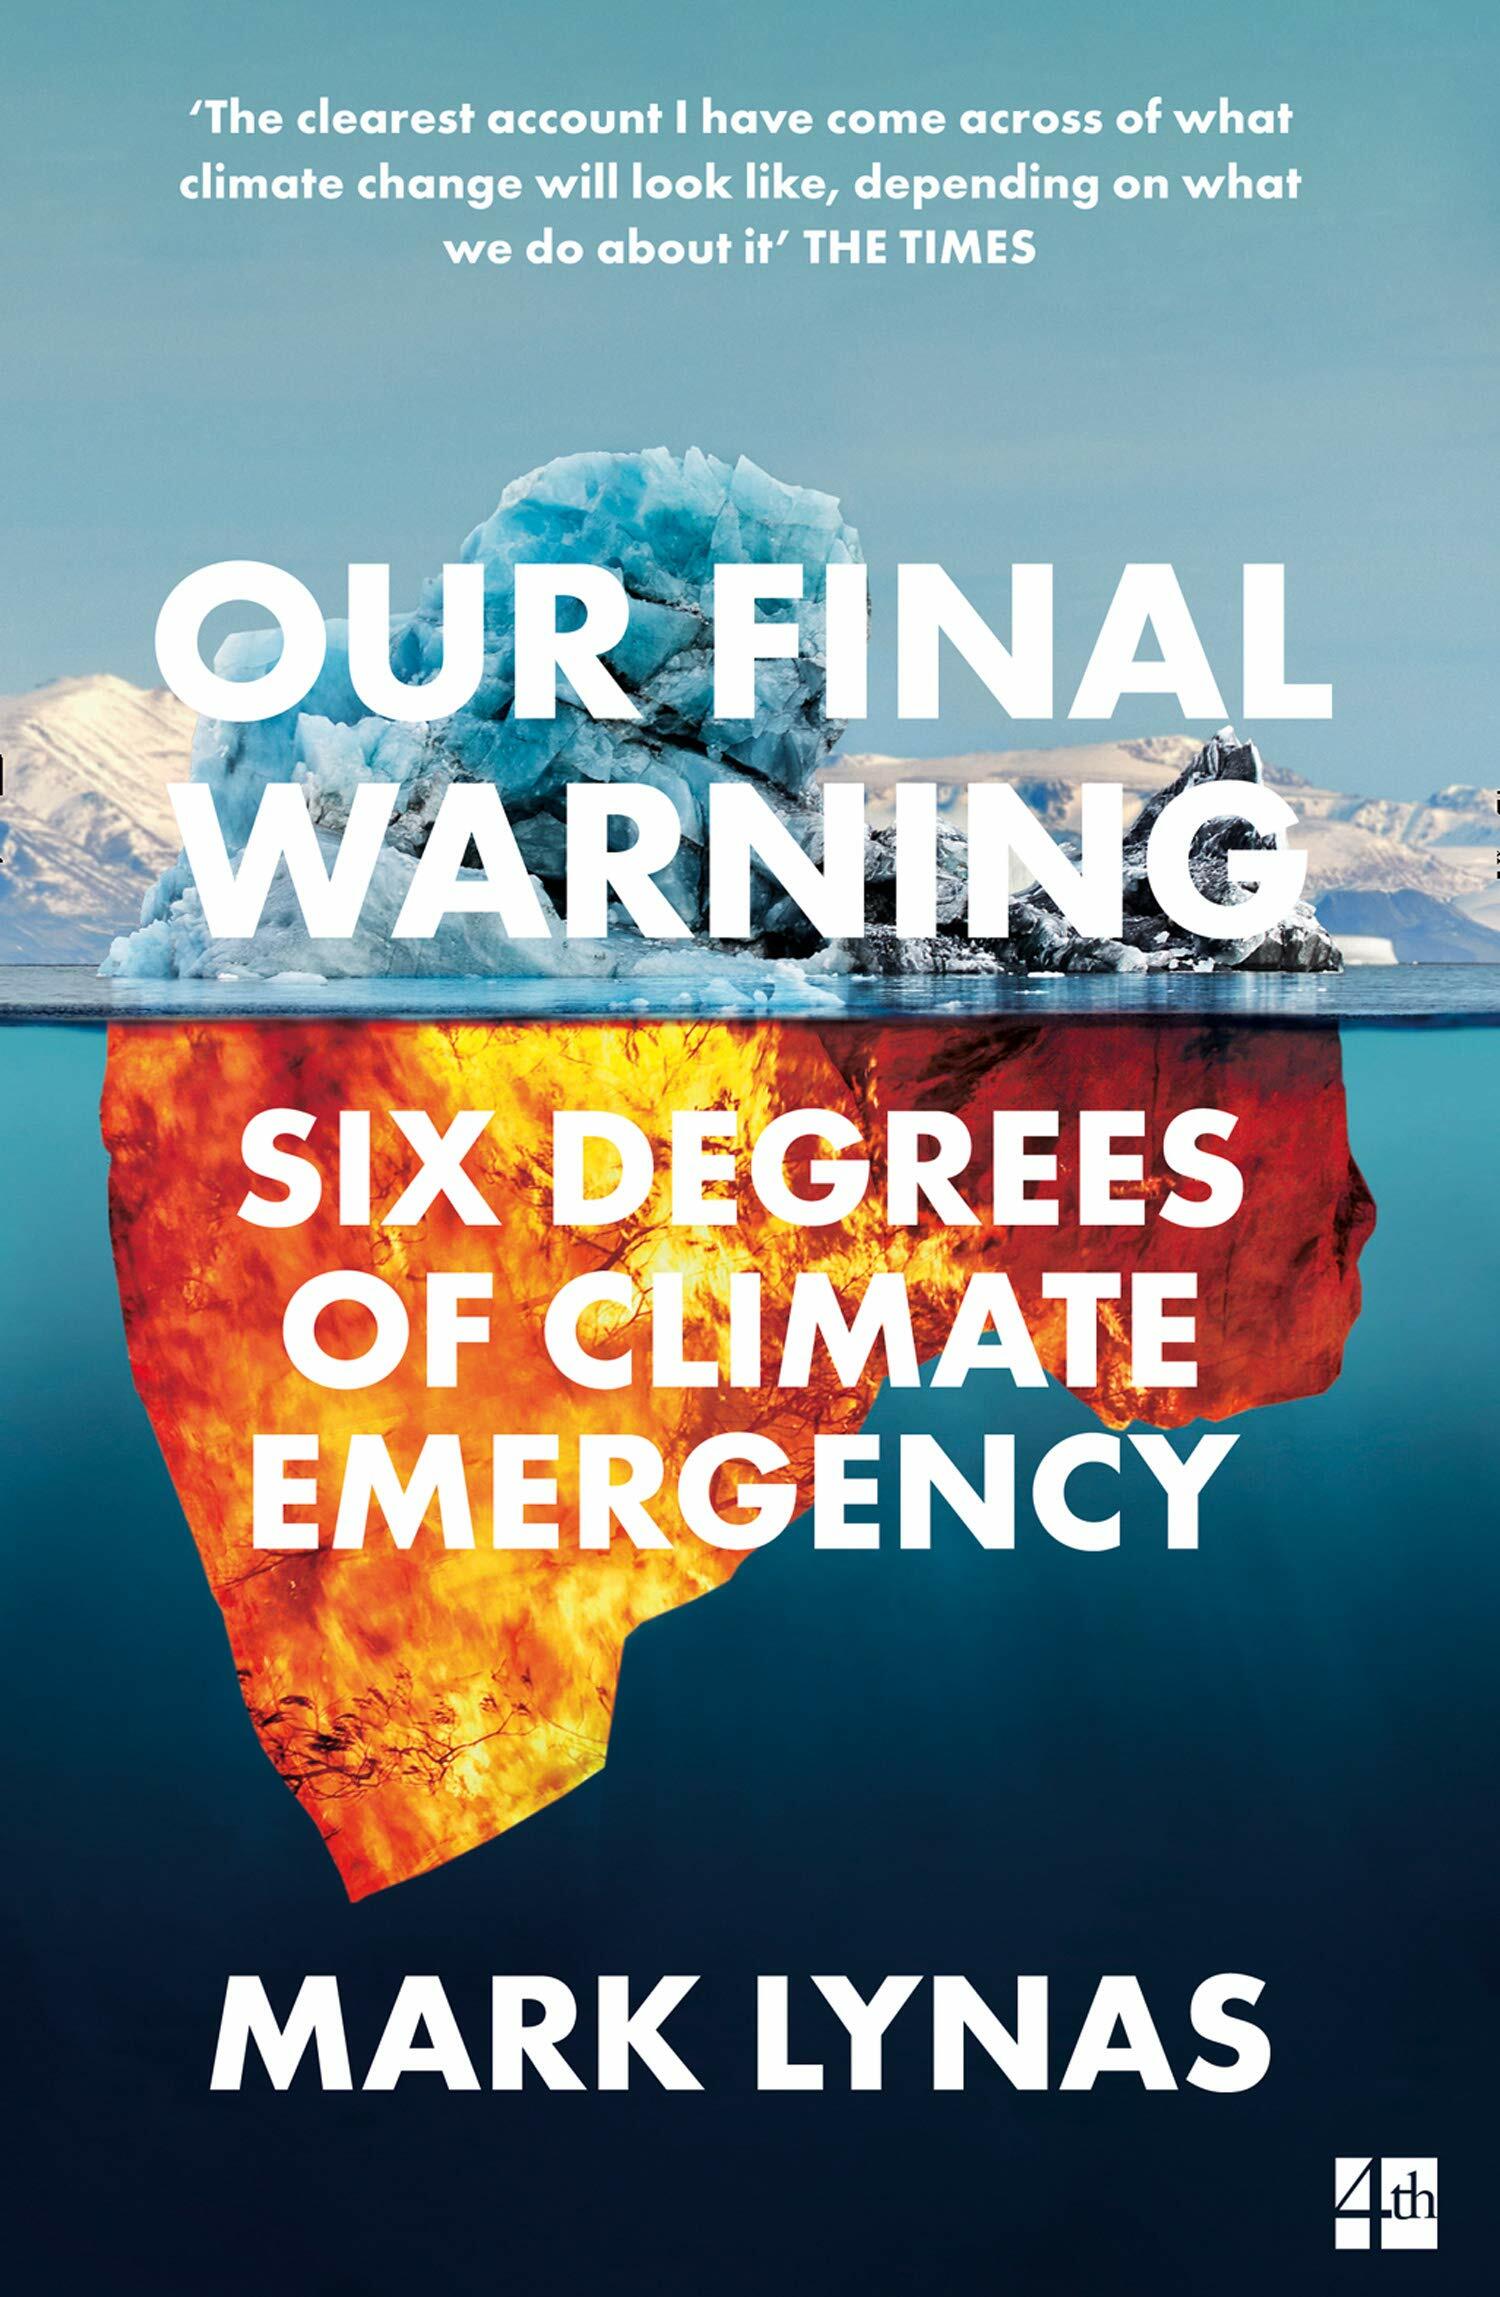 Our Final Warning : Six Degrees of Climate Emergency (Paperback)